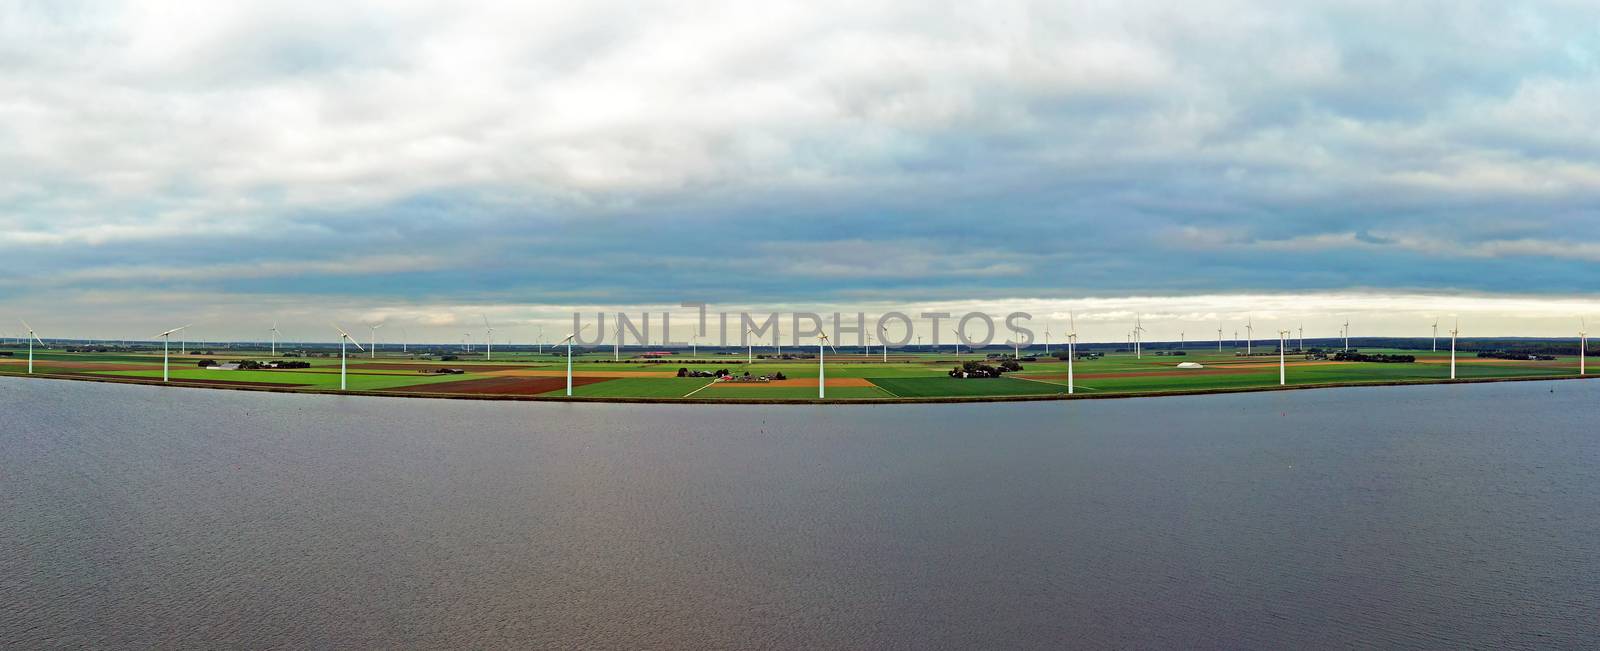 Aerial panorama from a wind farm at the Eenmeer in the Netherlan by devy